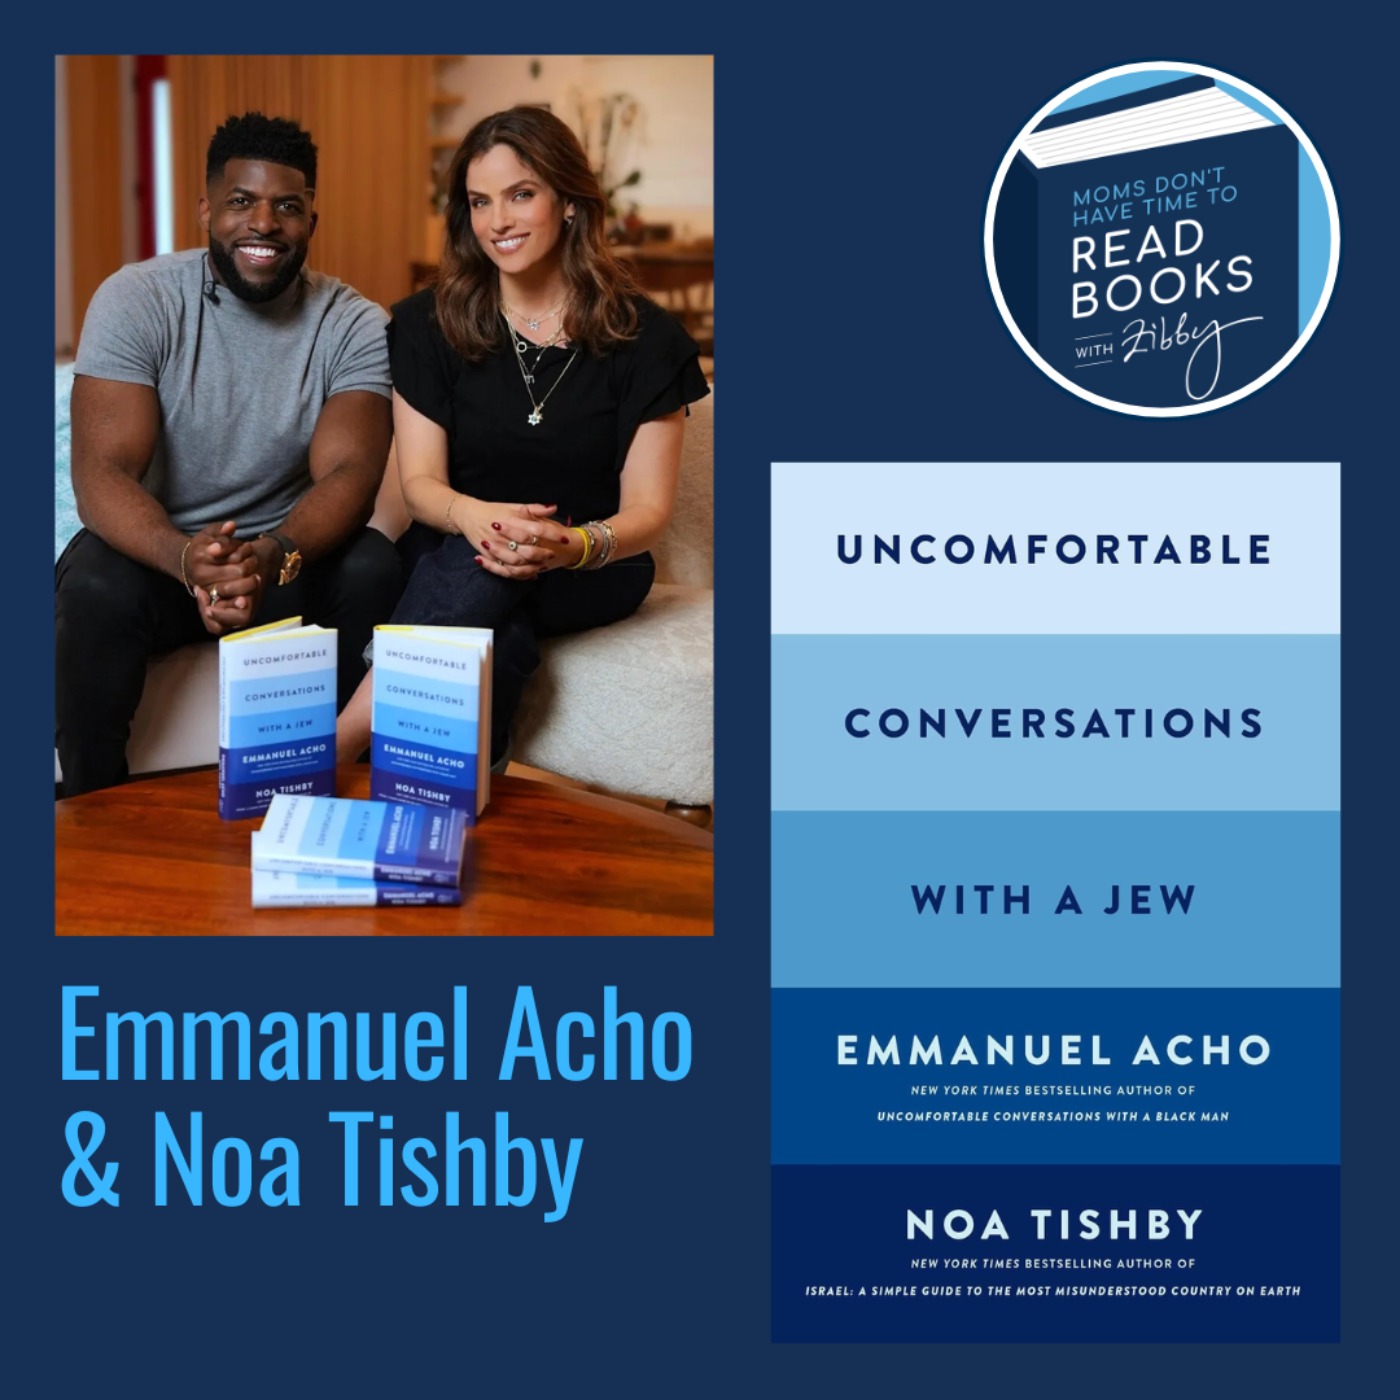 #3 on the NYT Bestseller list!! Emmanuel Acho and Noa Tishby, UNCOMFORTABLE CONVERSATIONS WITH A JEW